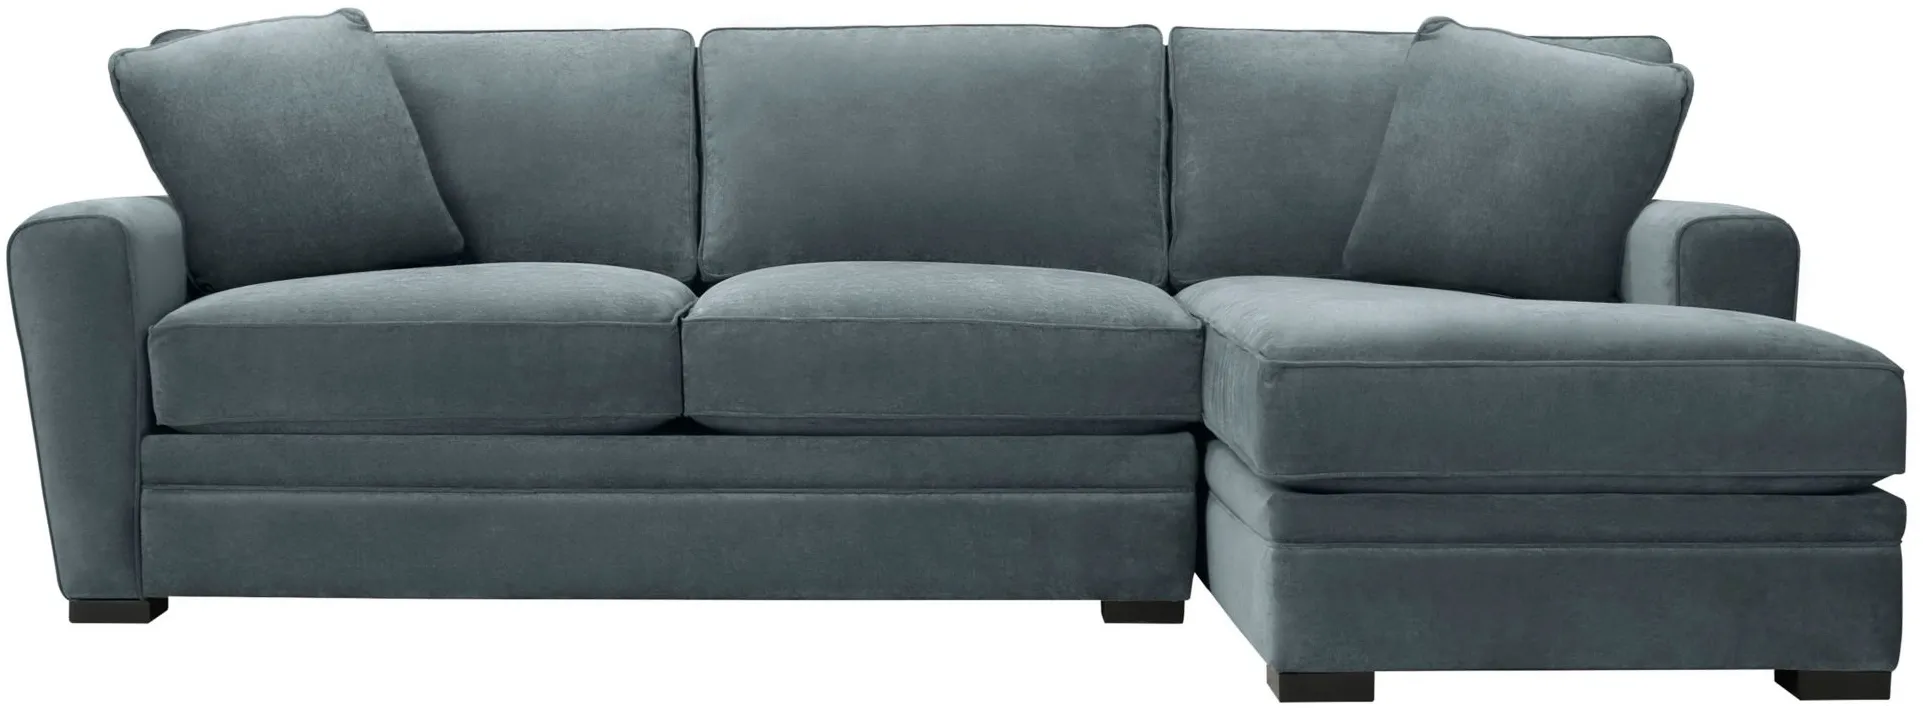 Artemis II 2-pc. Full Sleeper Right Hand Facing Sectional Sofa in Gypsy Blue Goblin by Jonathan Louis